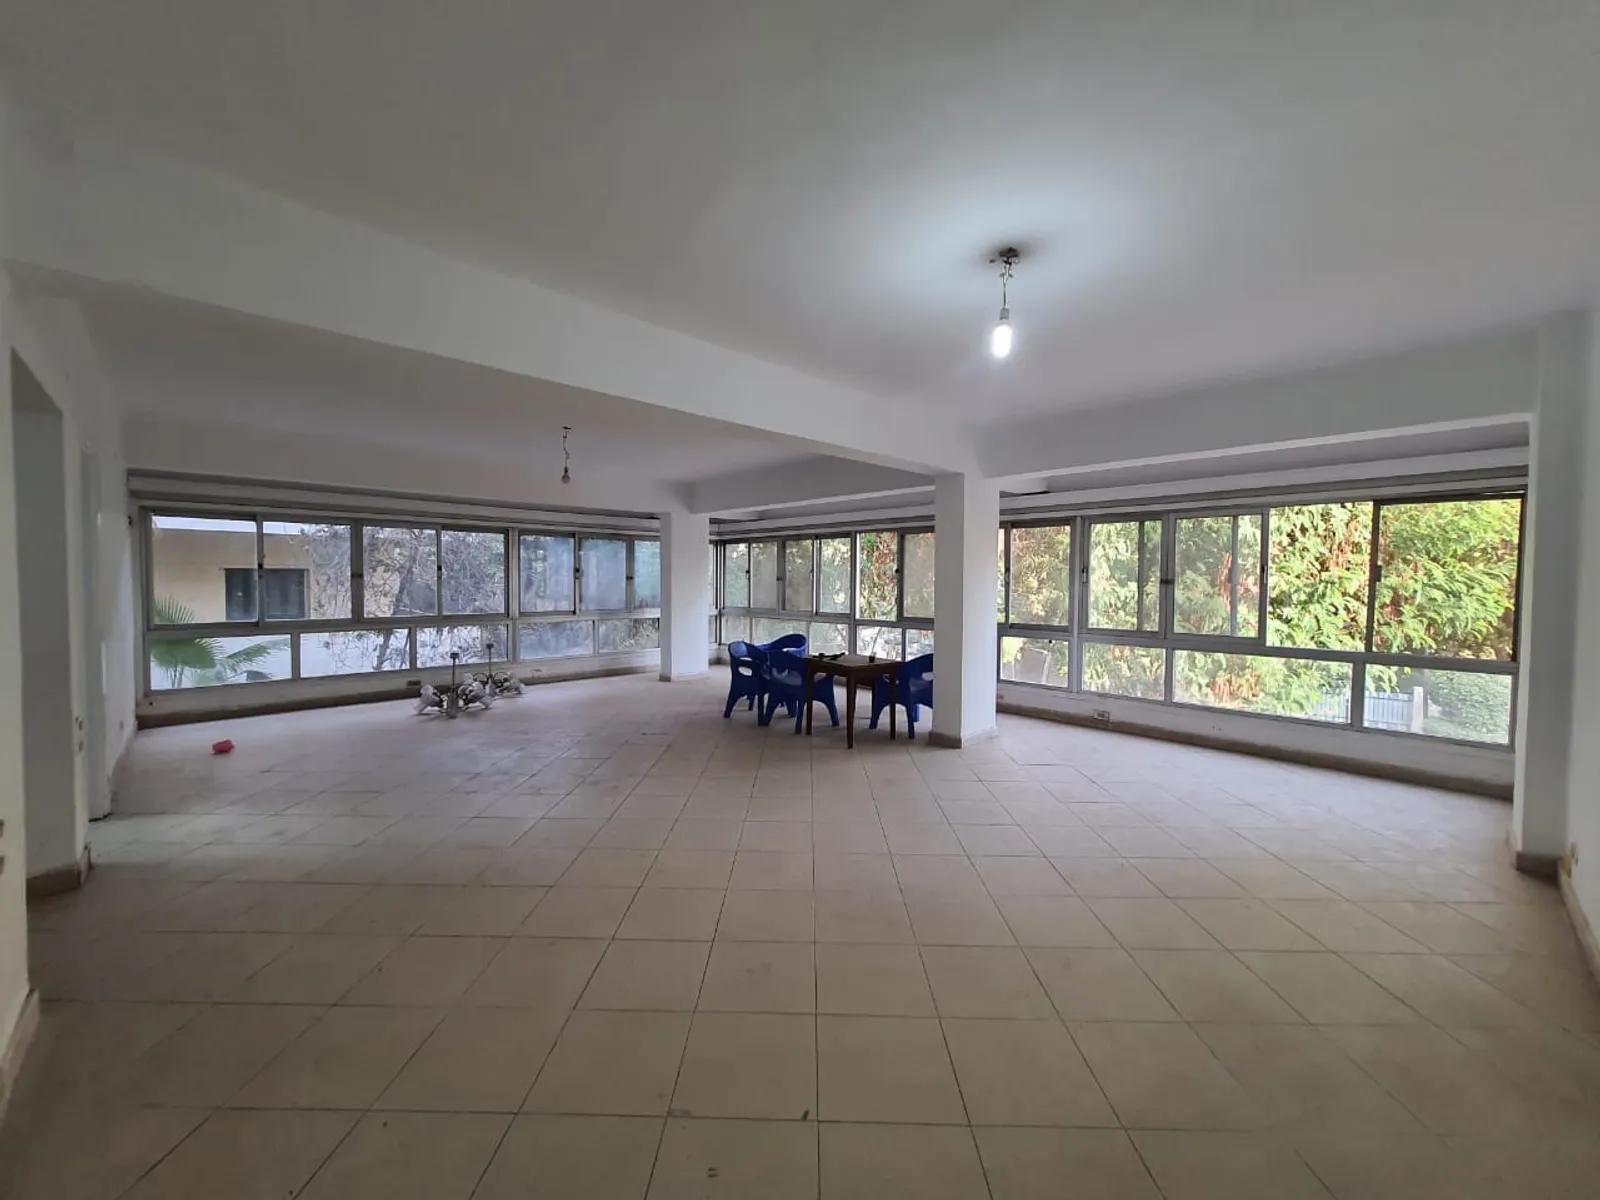 Office spaces For Sale In Maadi Maadi Sarayat Area: 220 m² consists of 3 Bedrooms 2 Bathrooms Semi furnished 5 stars #5569